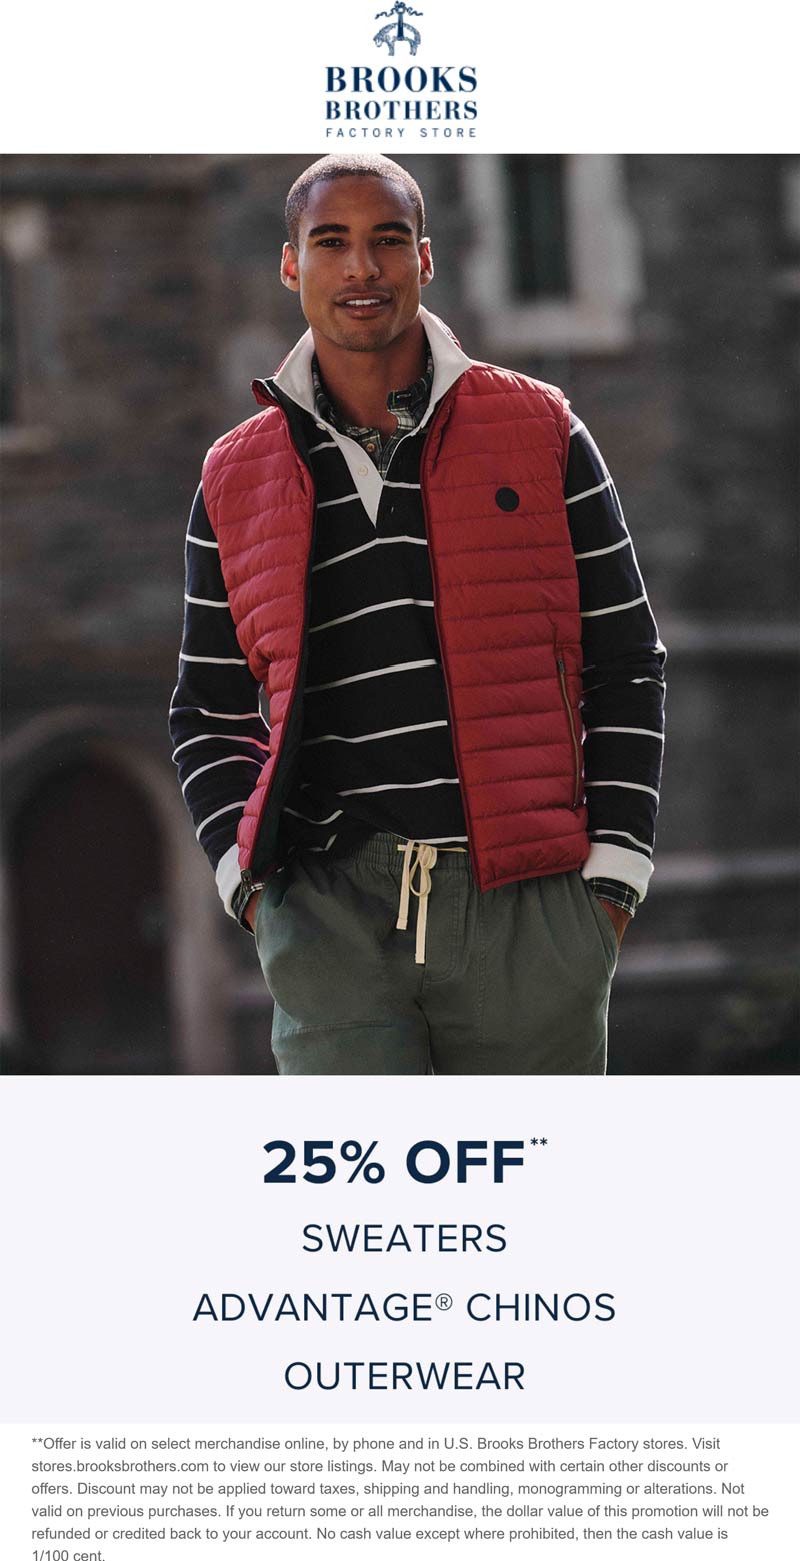 Brooks Brothers Factory Outlet stores Coupon  25% off outerwear at Brooks Brothers Factory Outlet, ditto online #brooksbrothersfactoryoutlet 